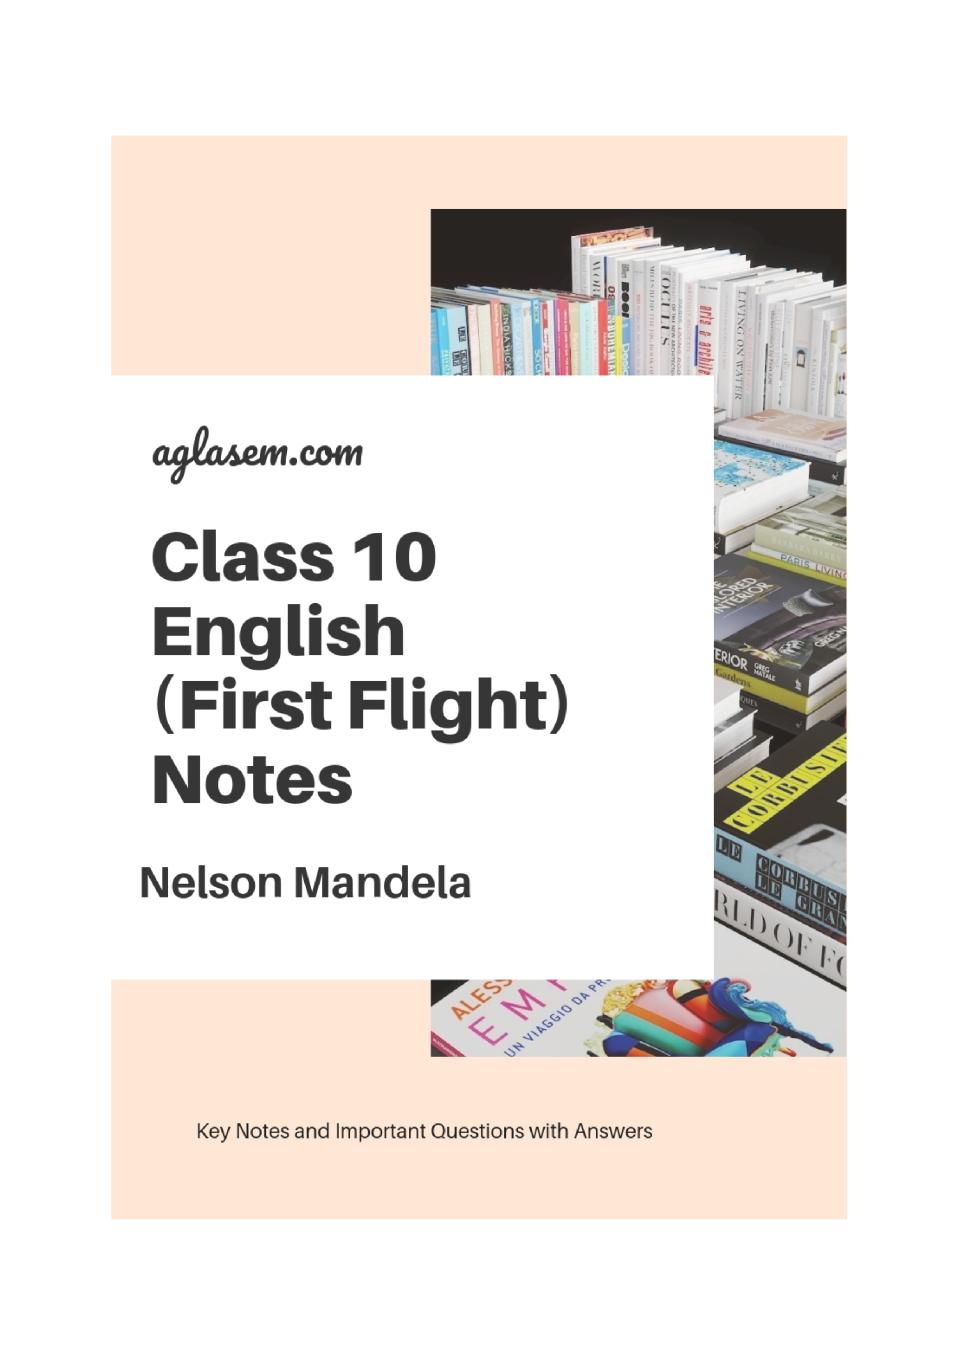 Class 10 English First Flight Notes For Nelson Mandela - Page 1